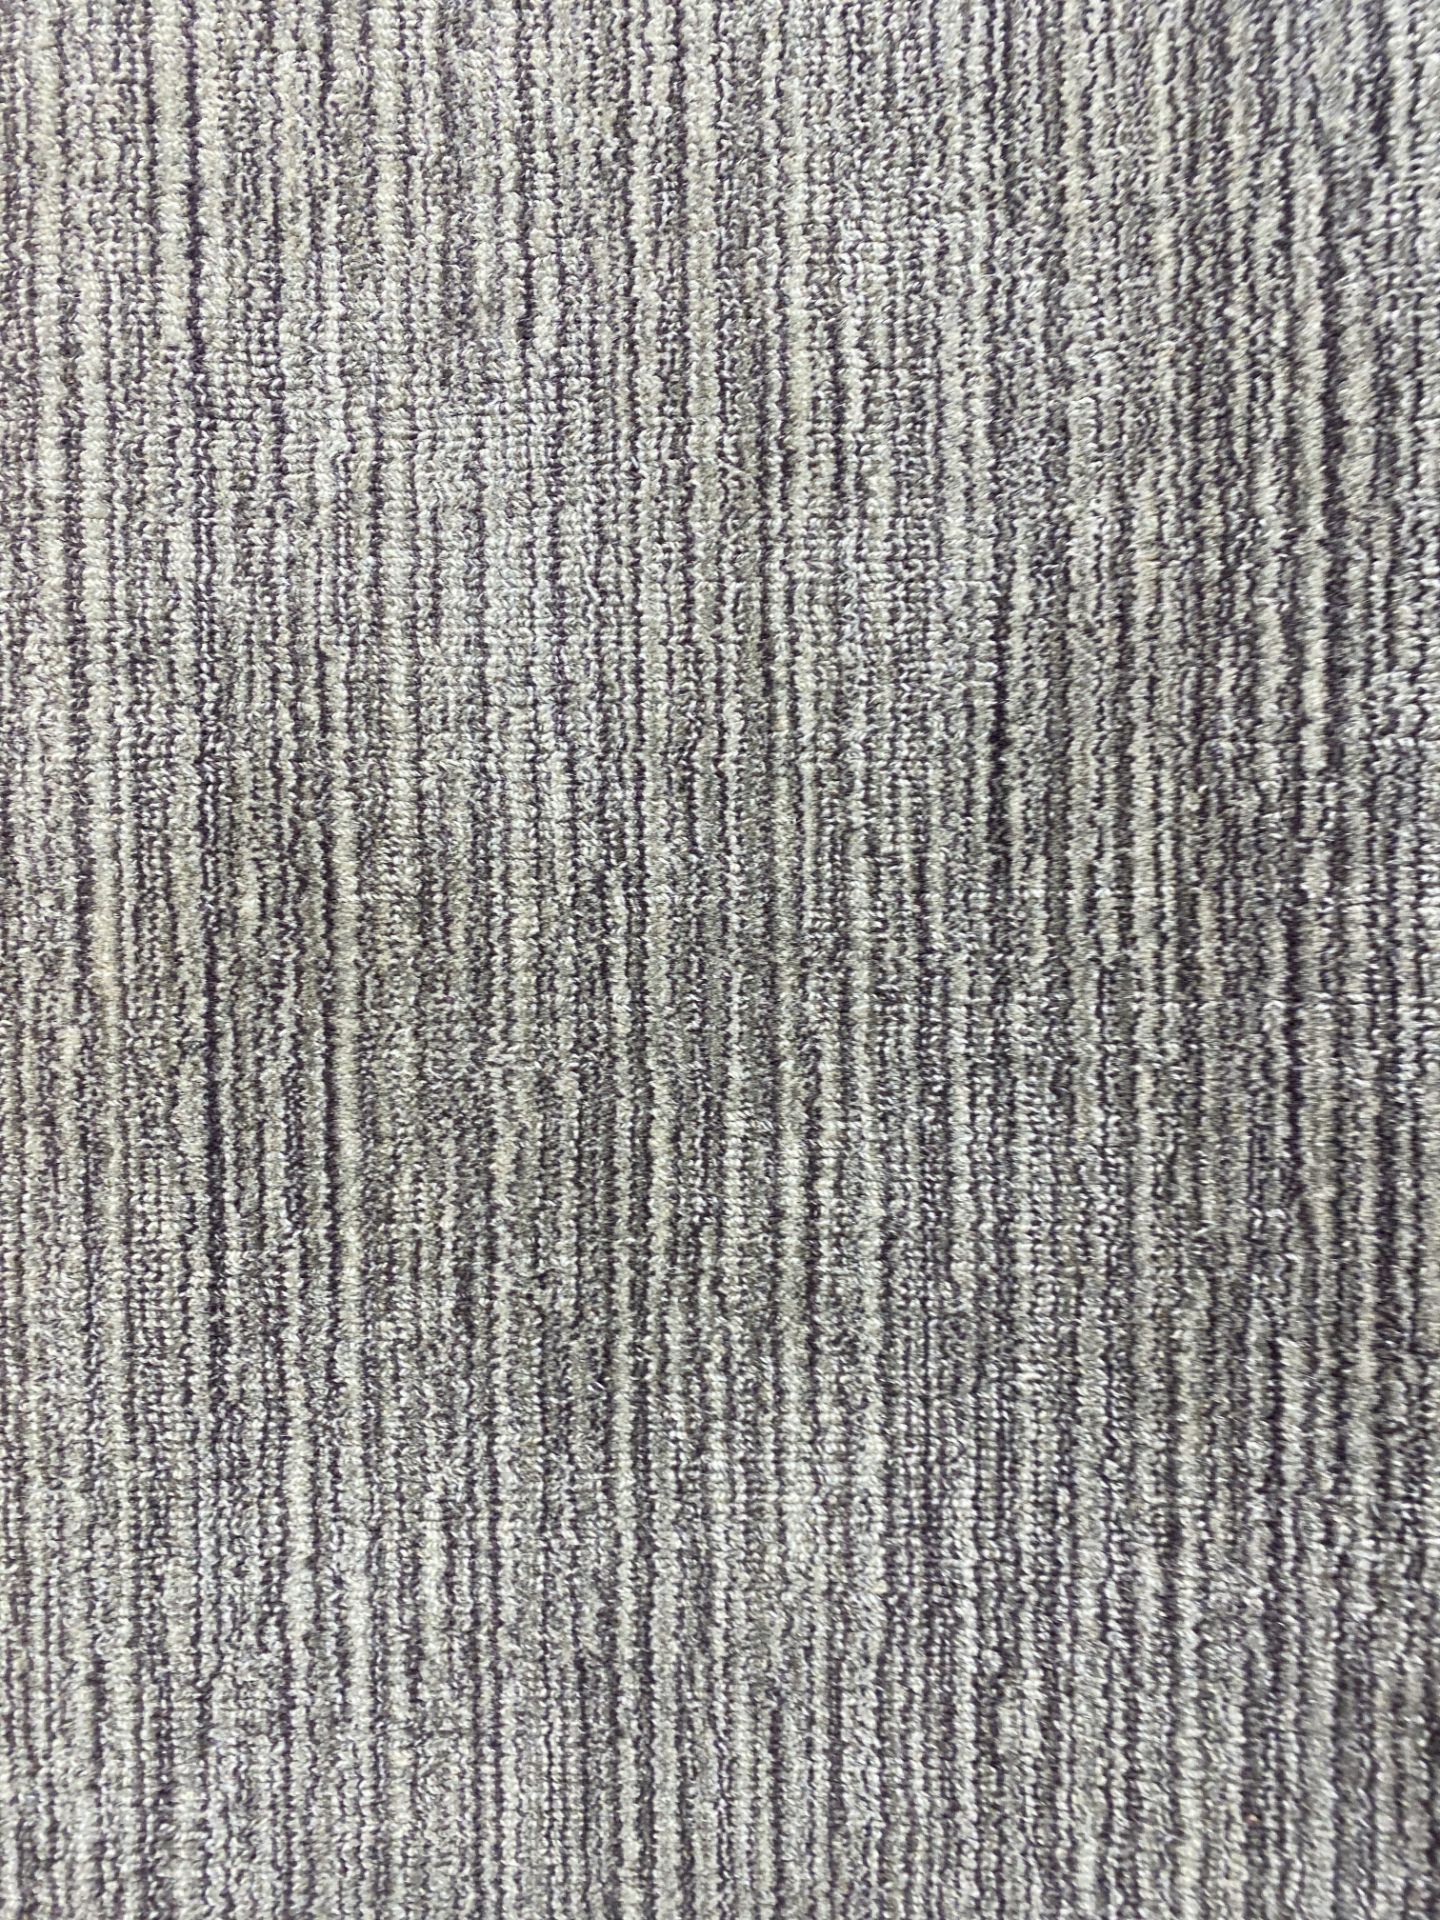 9' X 12' SIMPLICITY COLLECTION WOOL HANDMADE, MSRP $3,475, INVENTORY CODE SIMPLICITY PLML2 ORCHD - Image 2 of 4